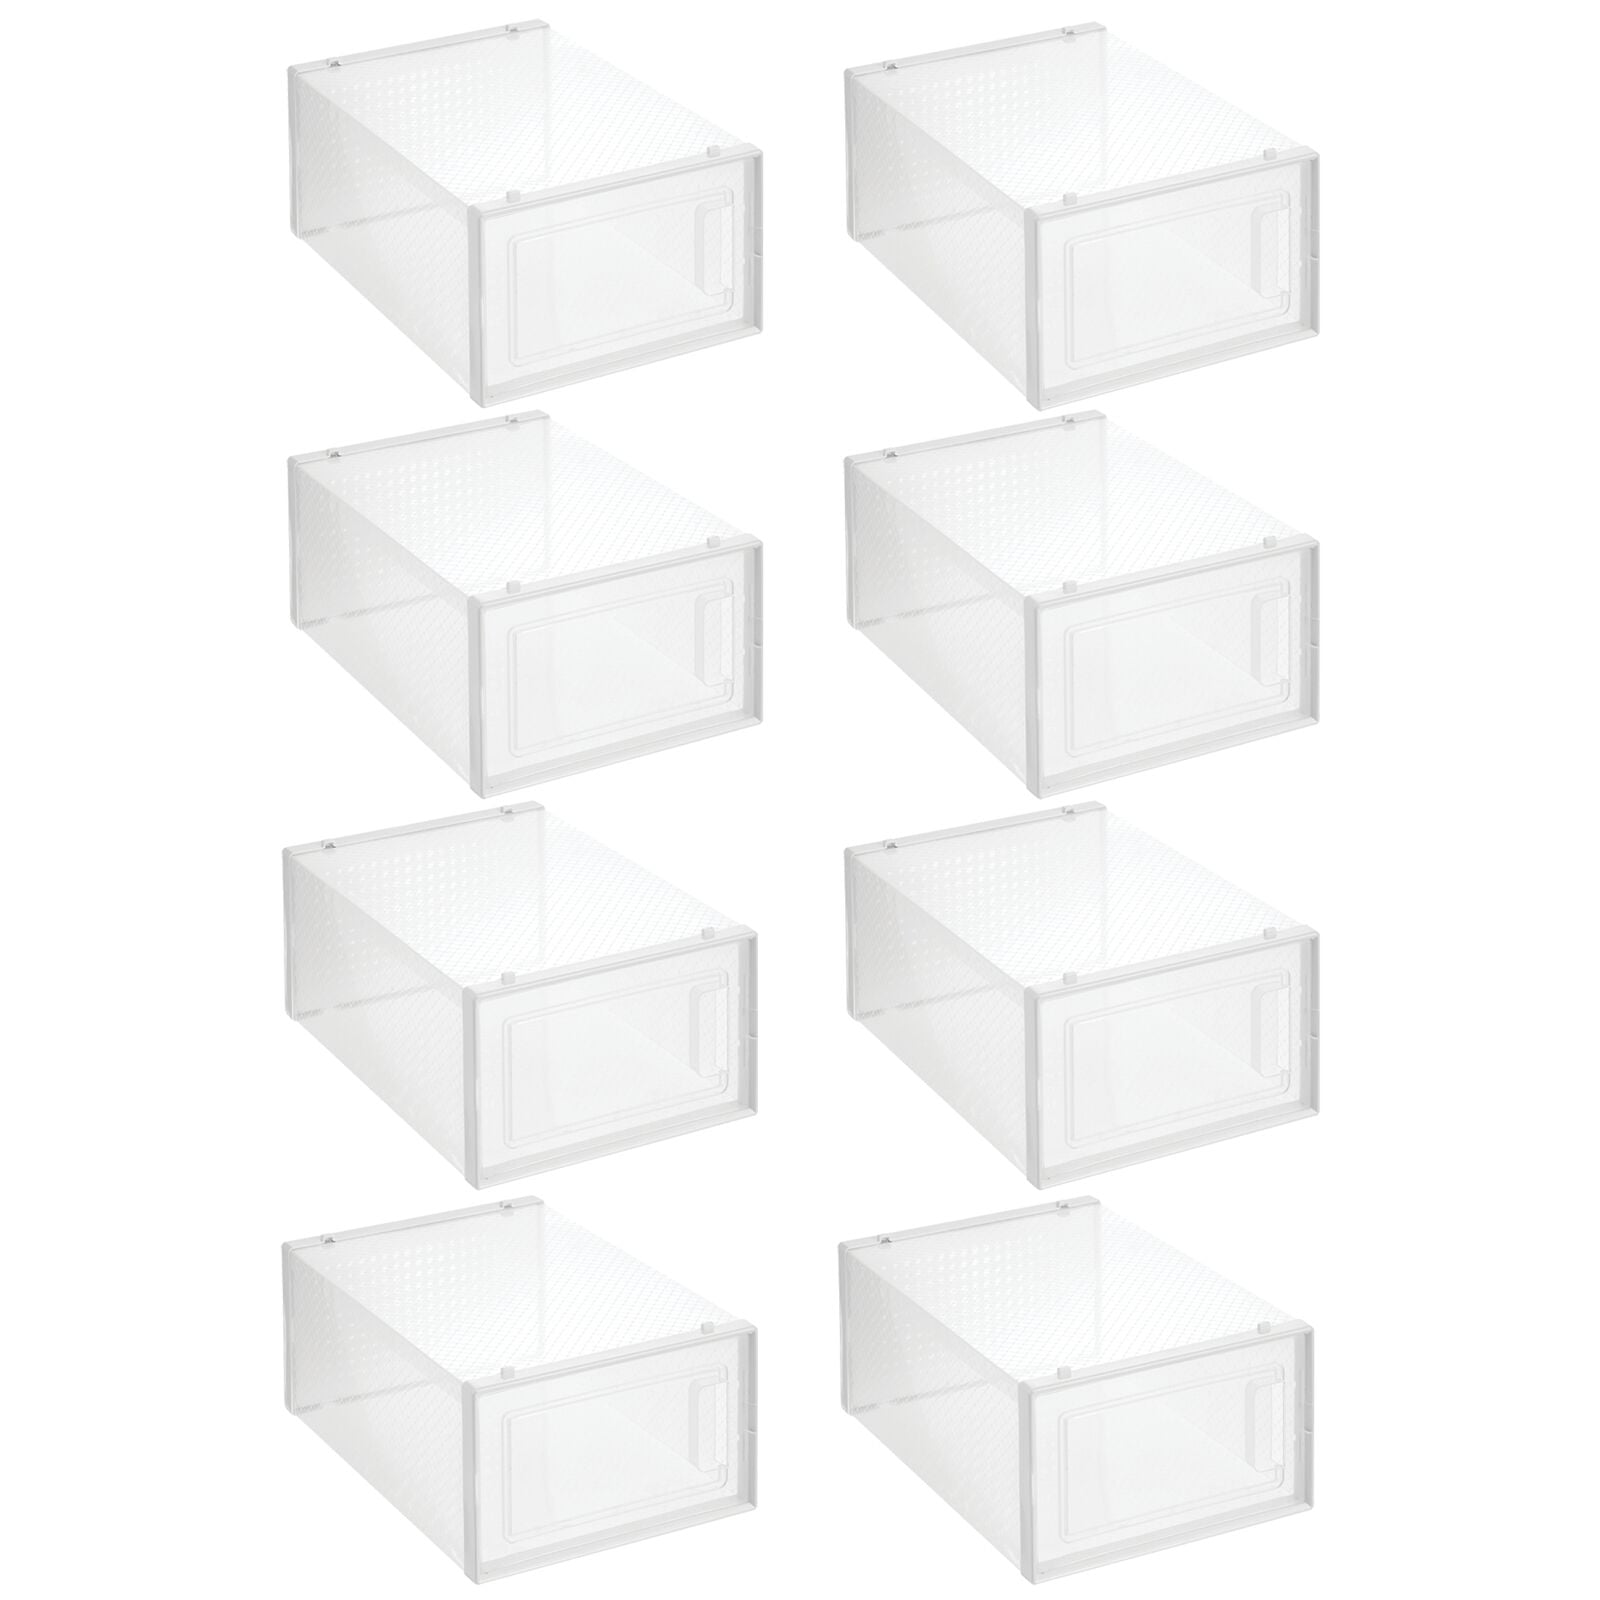 for High Heels Tall Pumps Clear Boots mDesign Closet Storage Organizer Shoe Box Pack of 4 